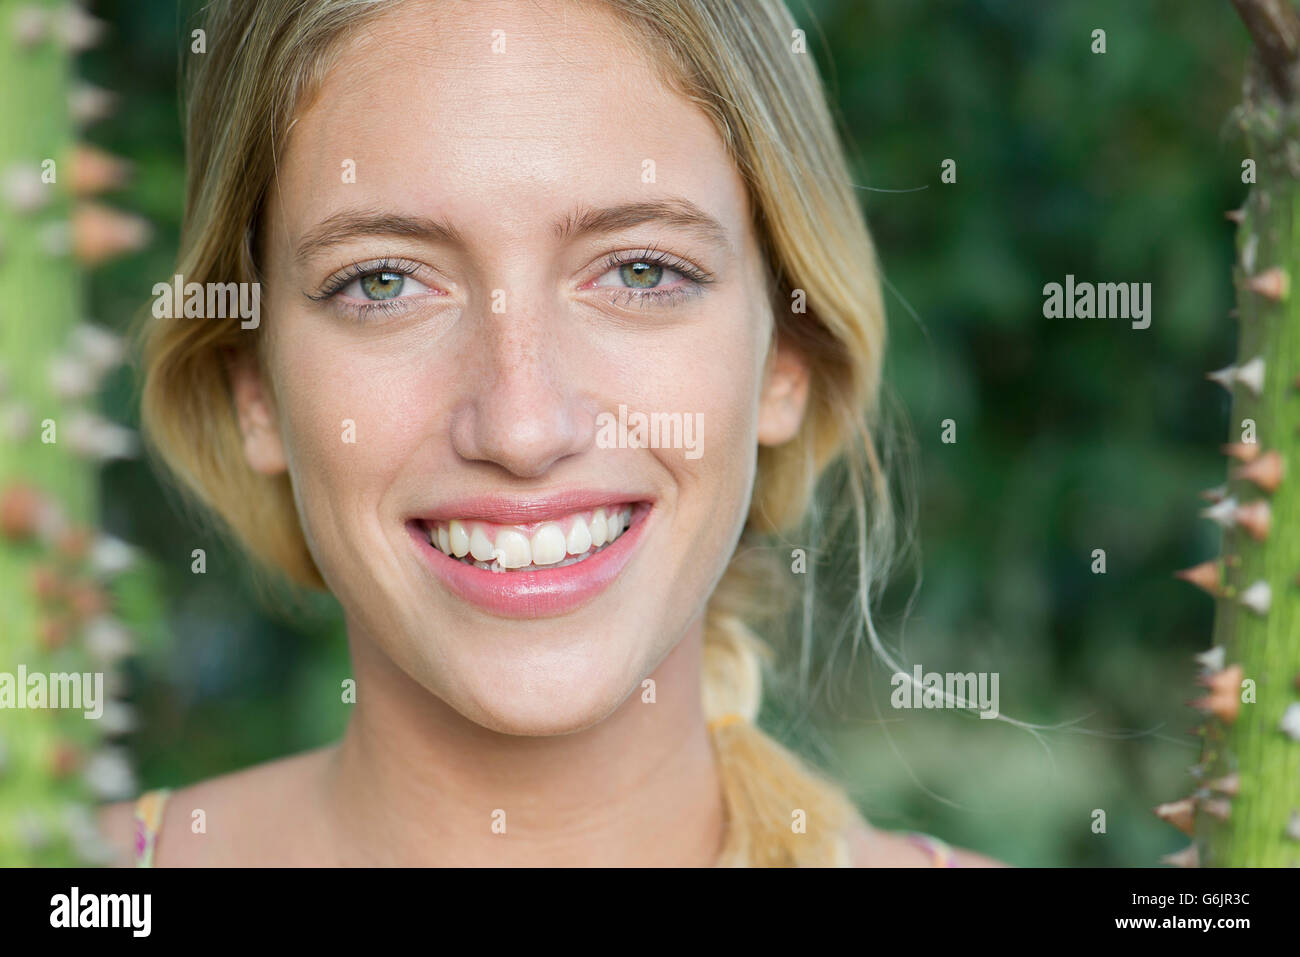 Young woman smiling cheerfully, portrait Stock Photo